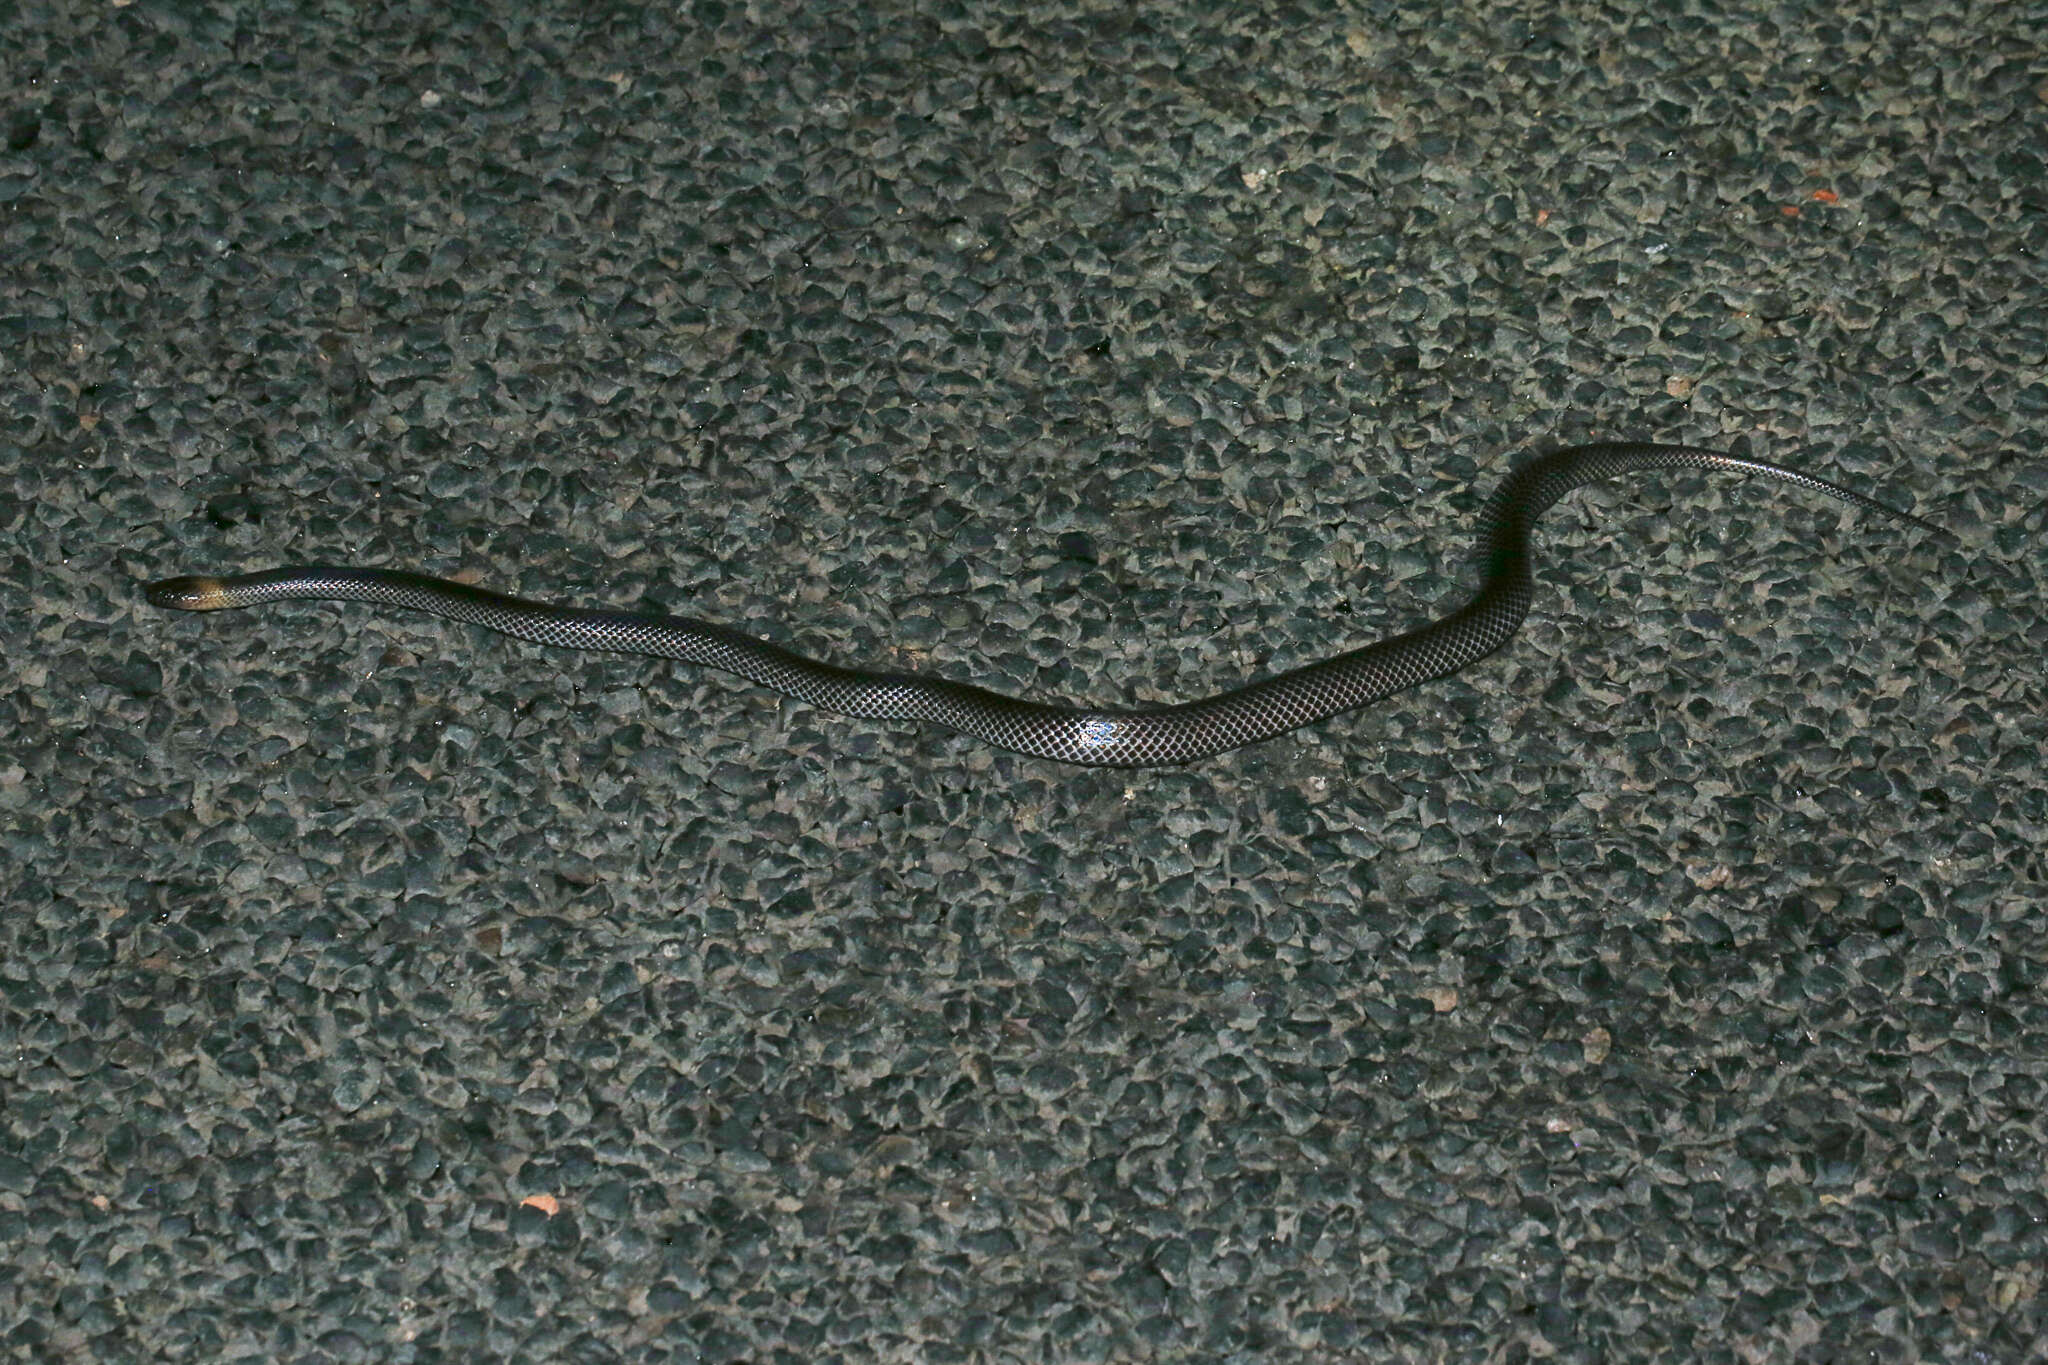 Image of Brown-headed or grey-naped snake